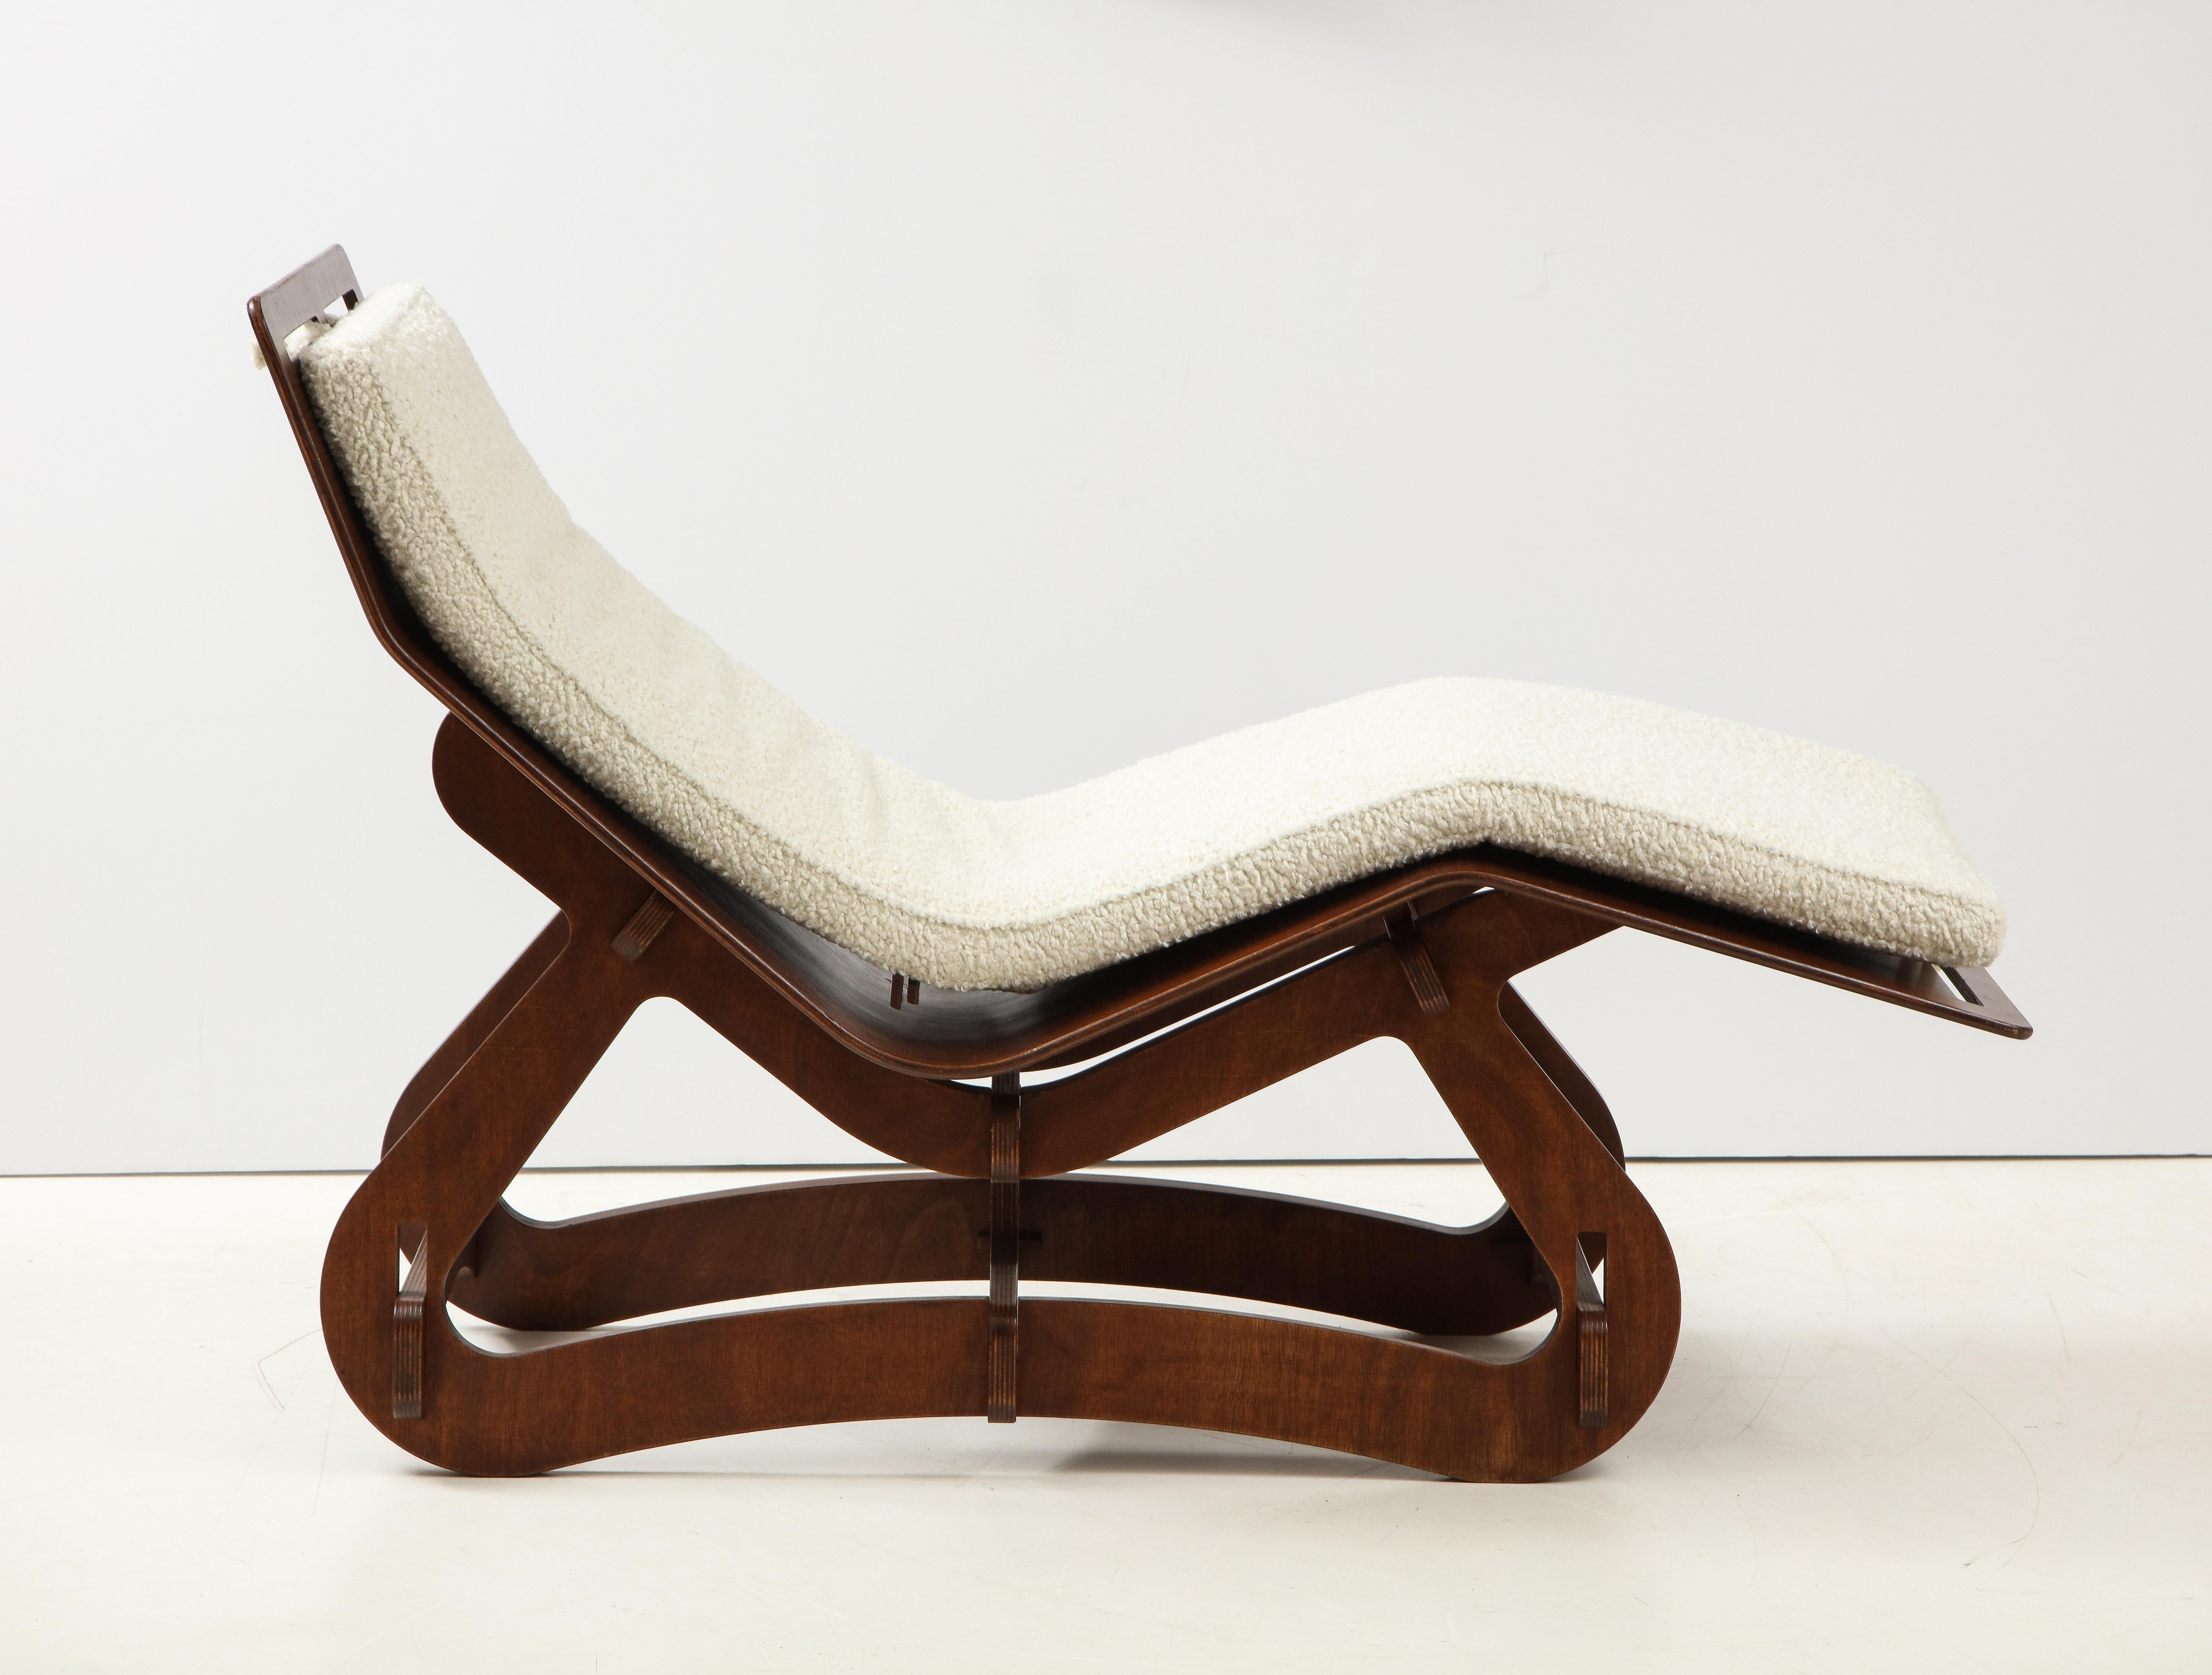 European Modernist Walnut Chaise Longue, circa 1950 In Good Condition For Sale In New York, NY